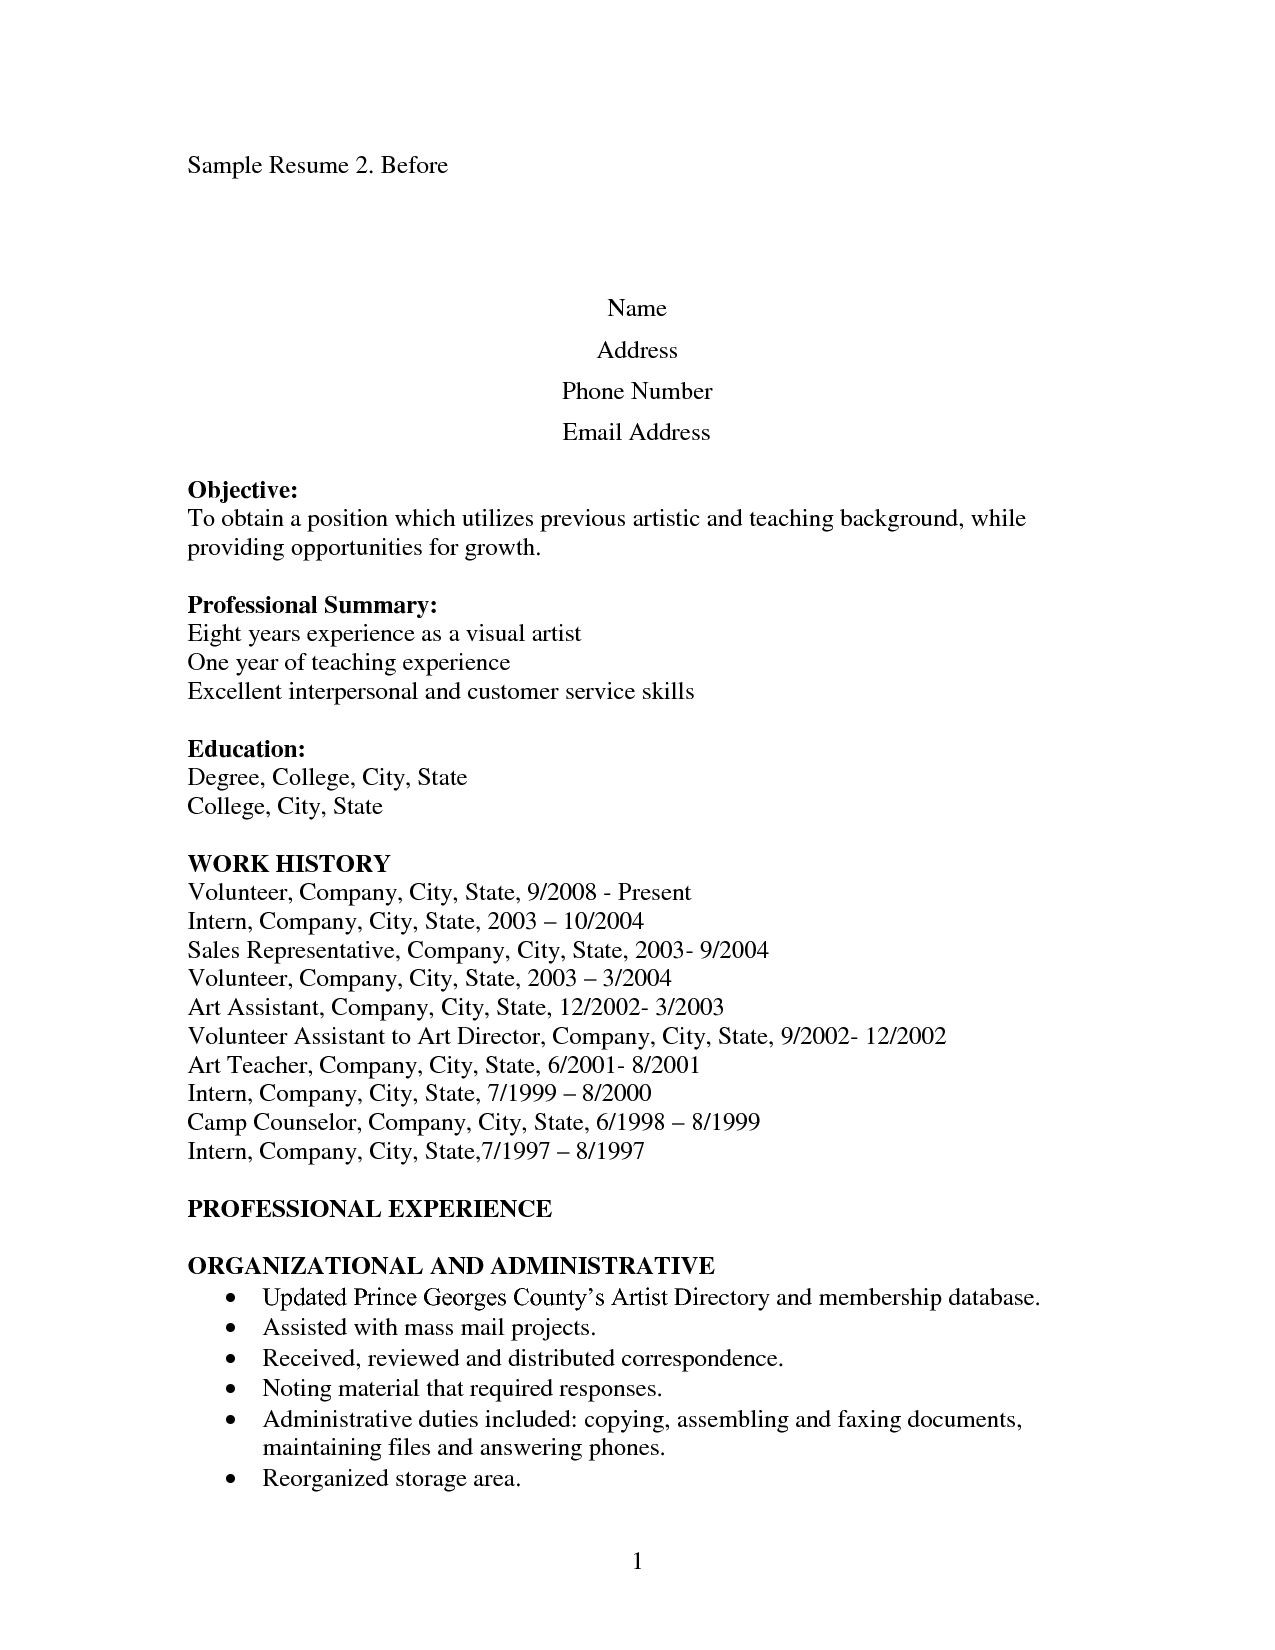 Resume Template for Mothers Returning to Work Stay at Home Returning to Work Cover Letter December 2021